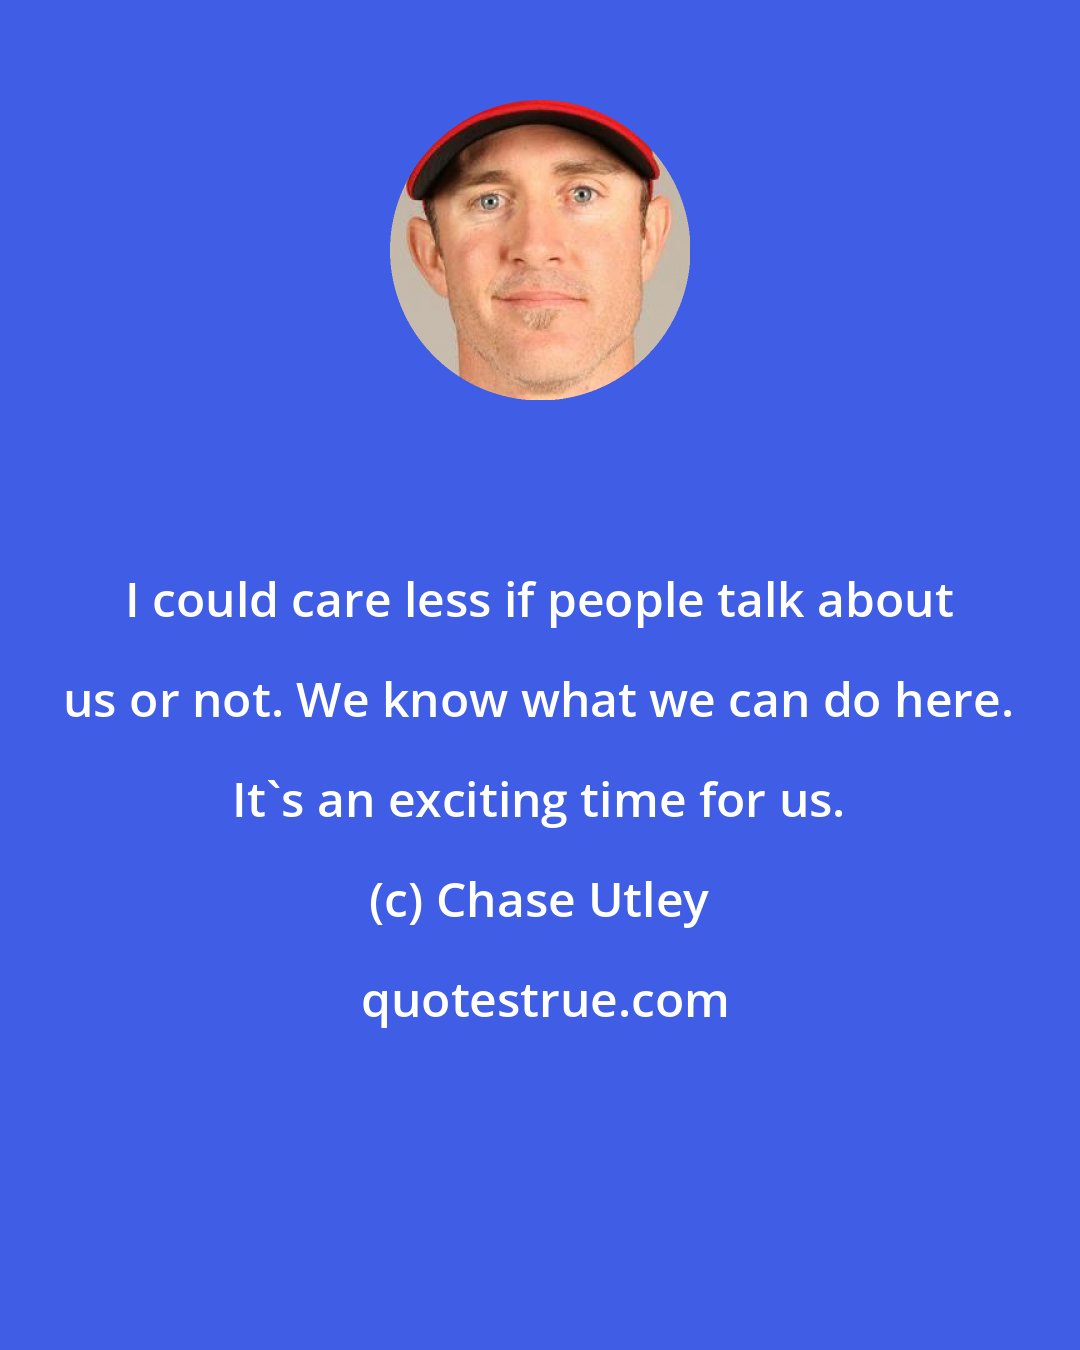 Chase Utley: I could care less if people talk about us or not. We know what we can do here. It's an exciting time for us.